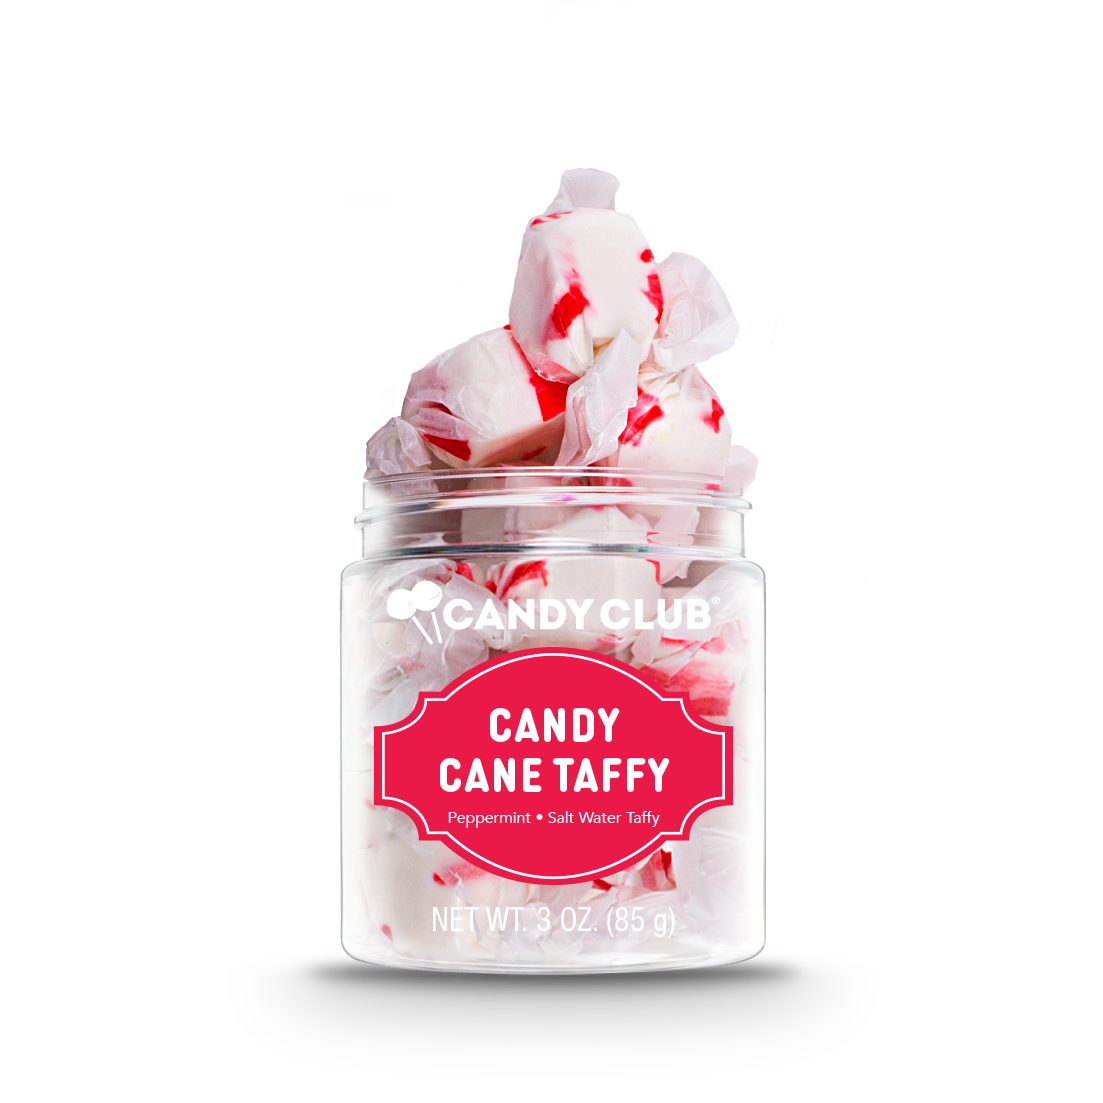 Candy Cane Taffy Home & Lifestyle Candy Club